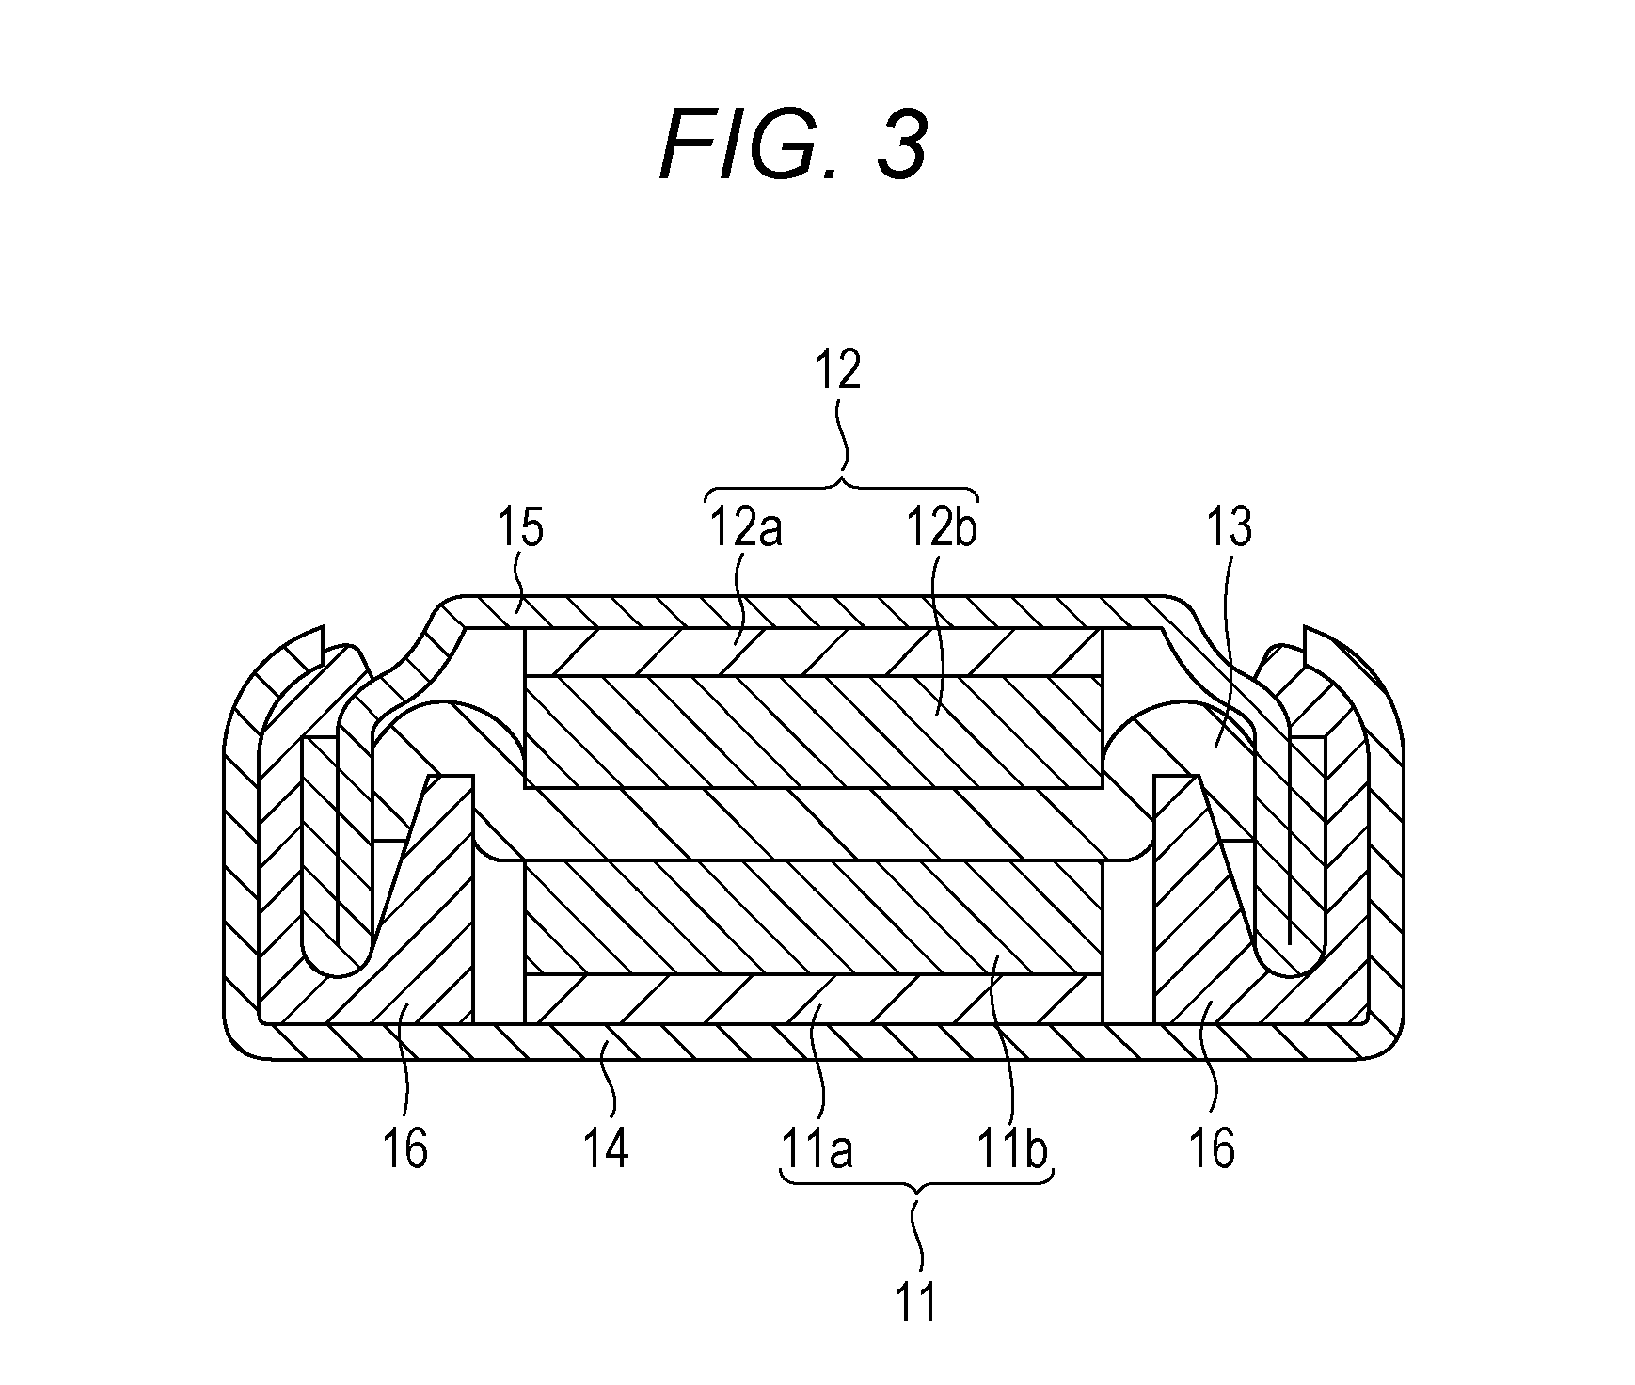 Aluminum secondary battery and electronic device